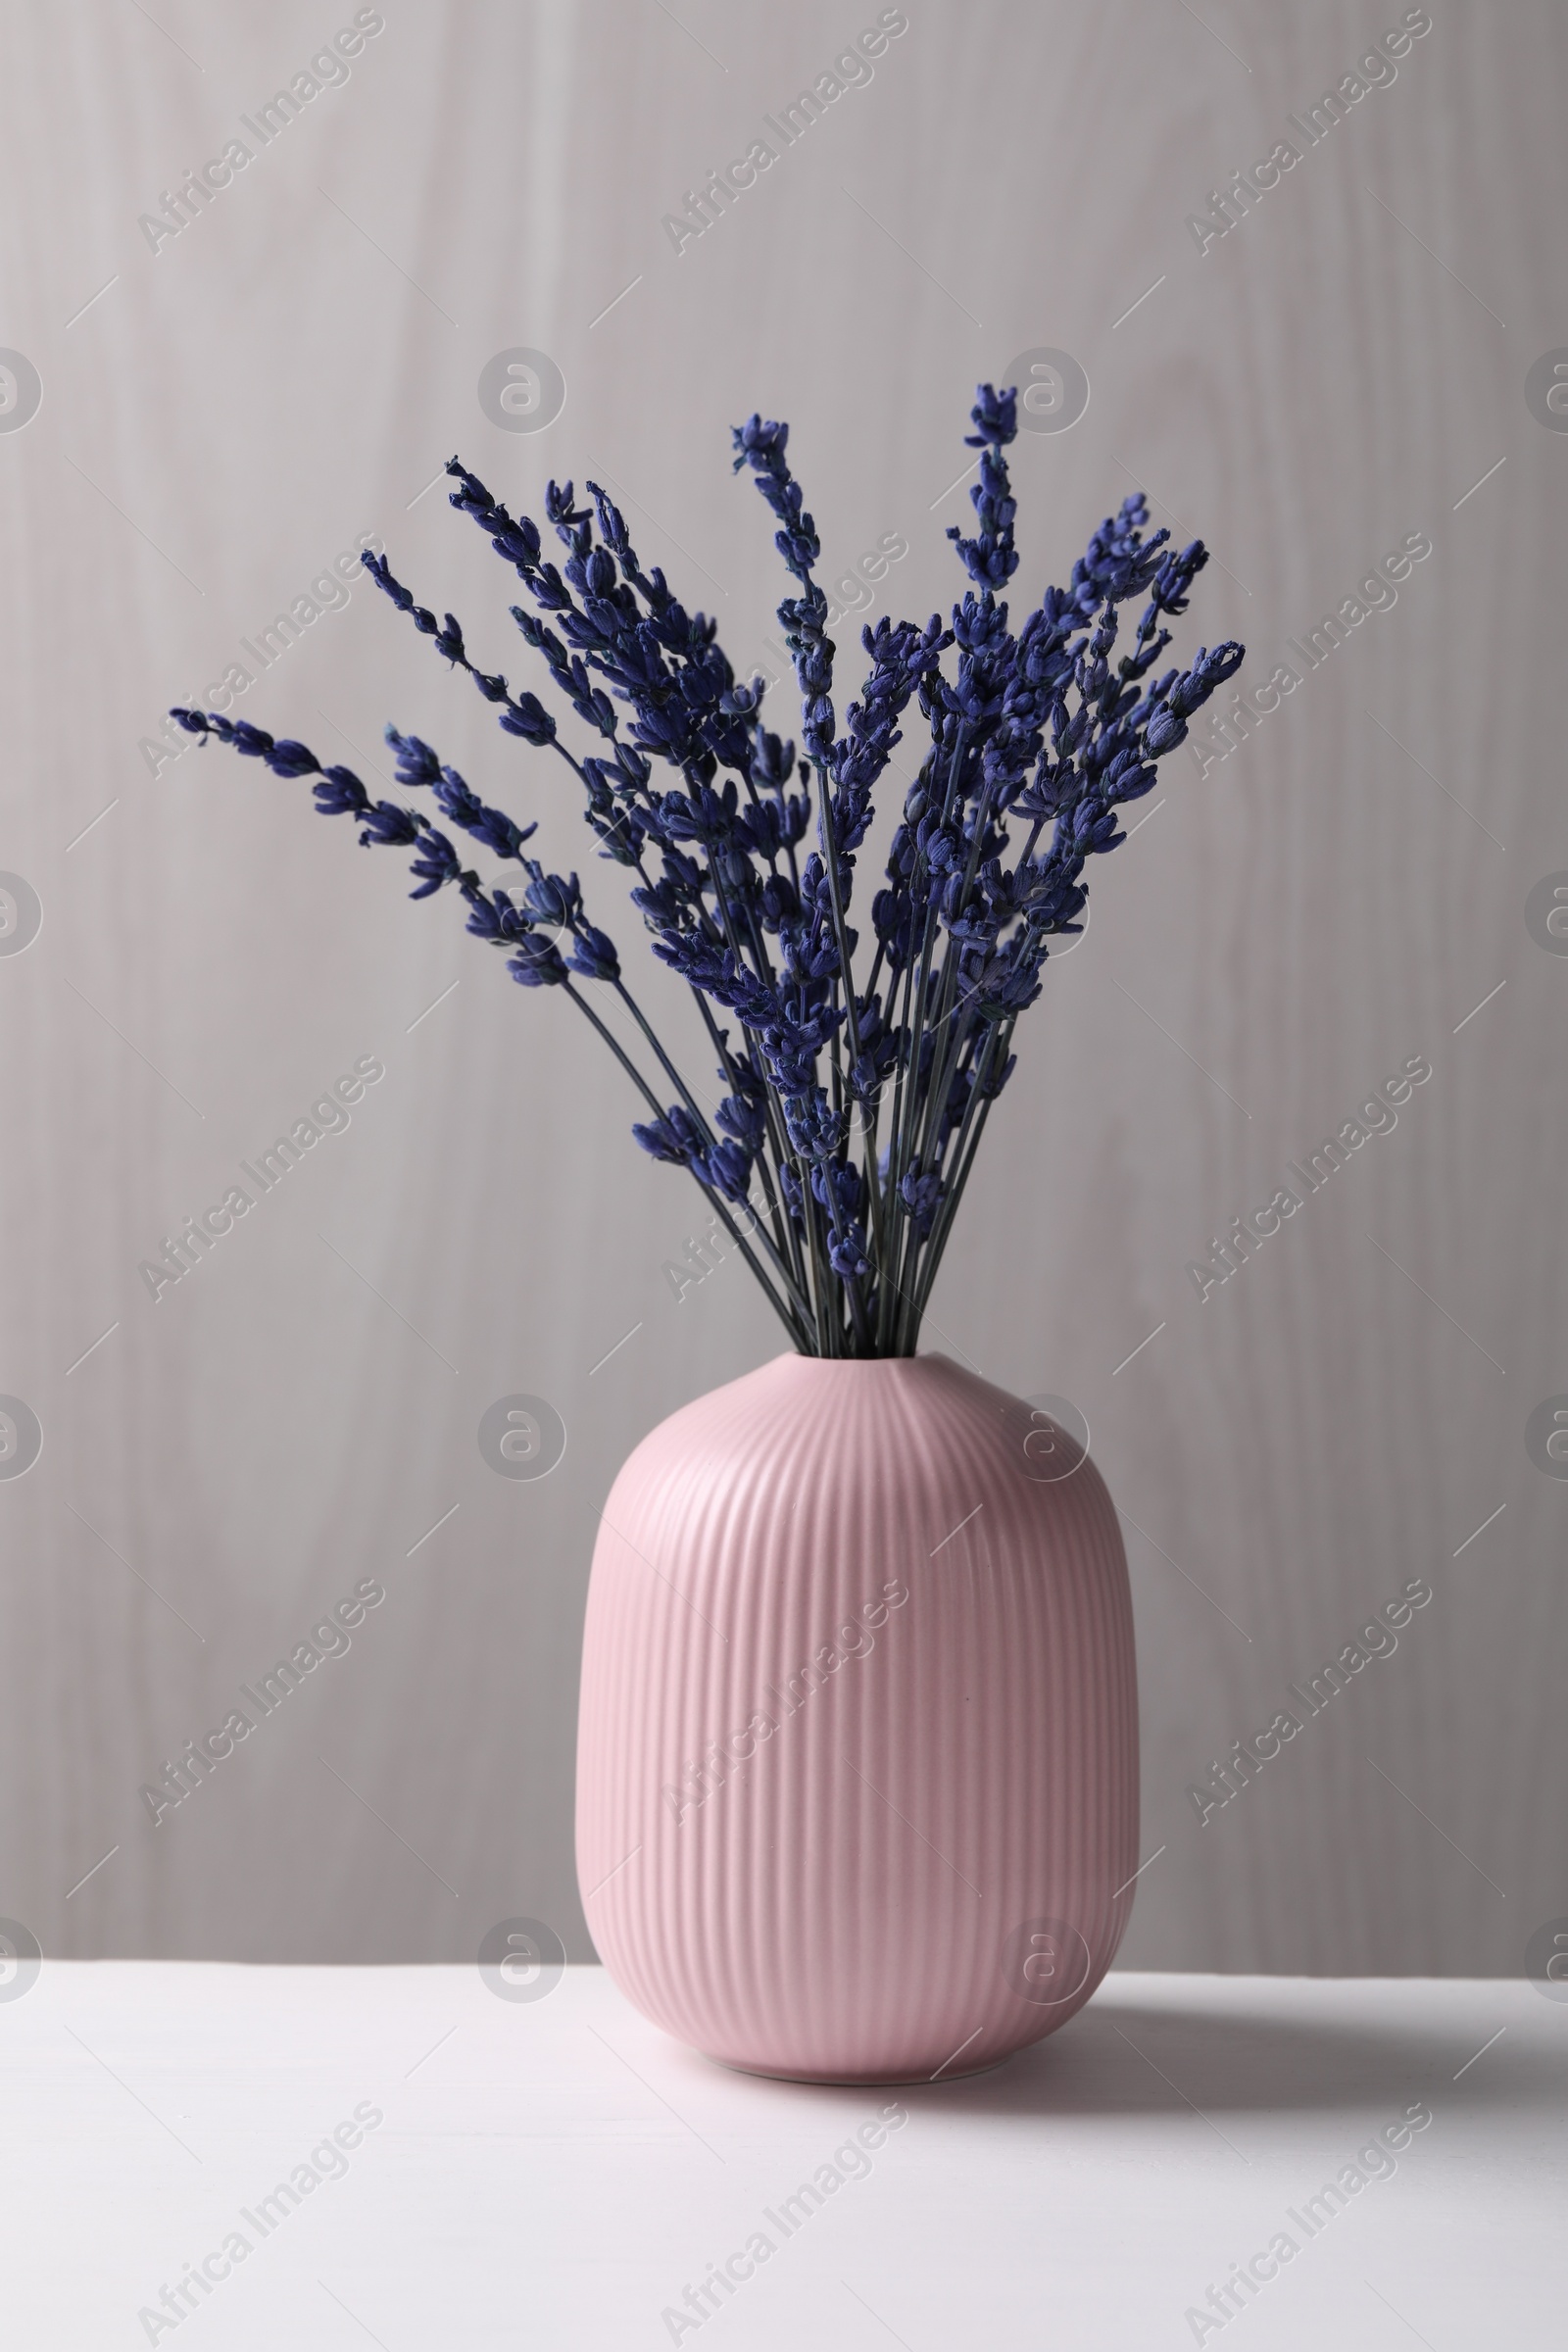 Photo of Bouquet of beautiful preserved lavender flowers on white table near grey wooden wall